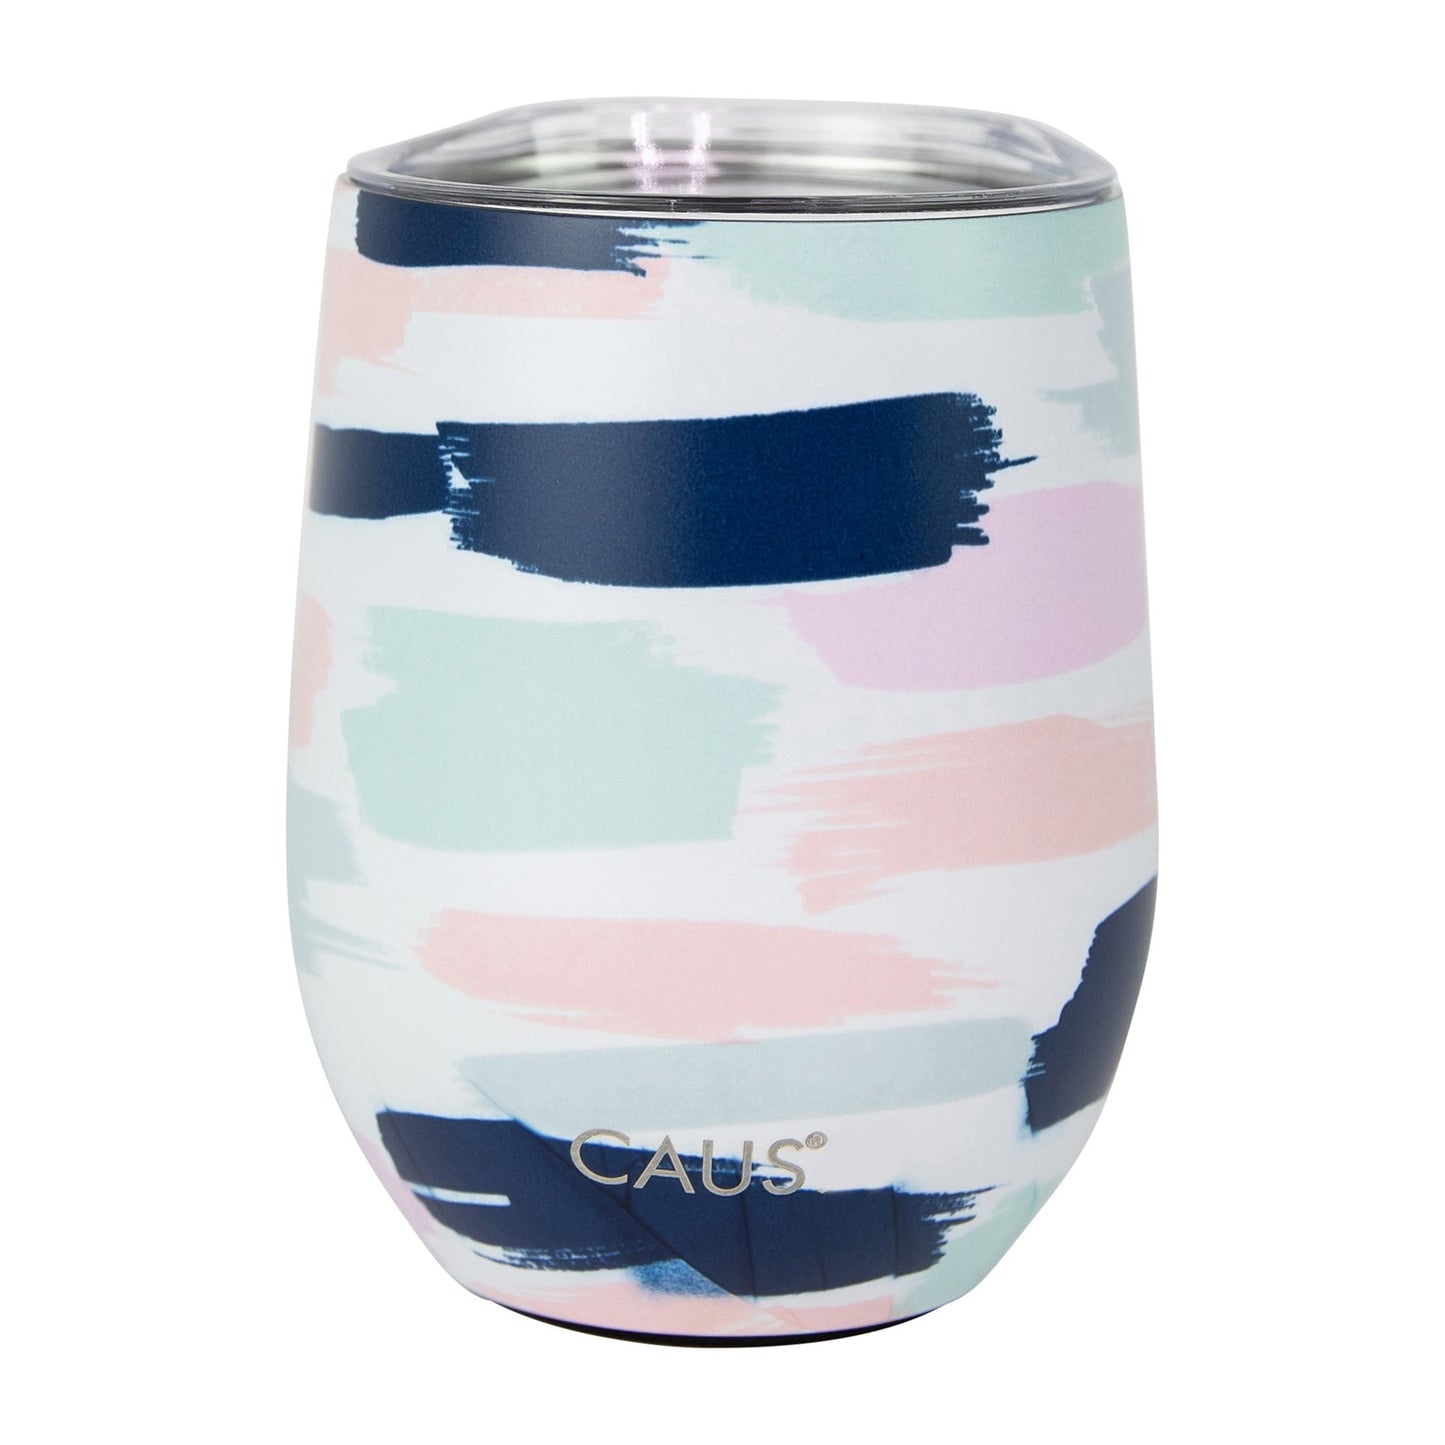 Caus Stainless Steel Drink Tumbler Pretty in Paint